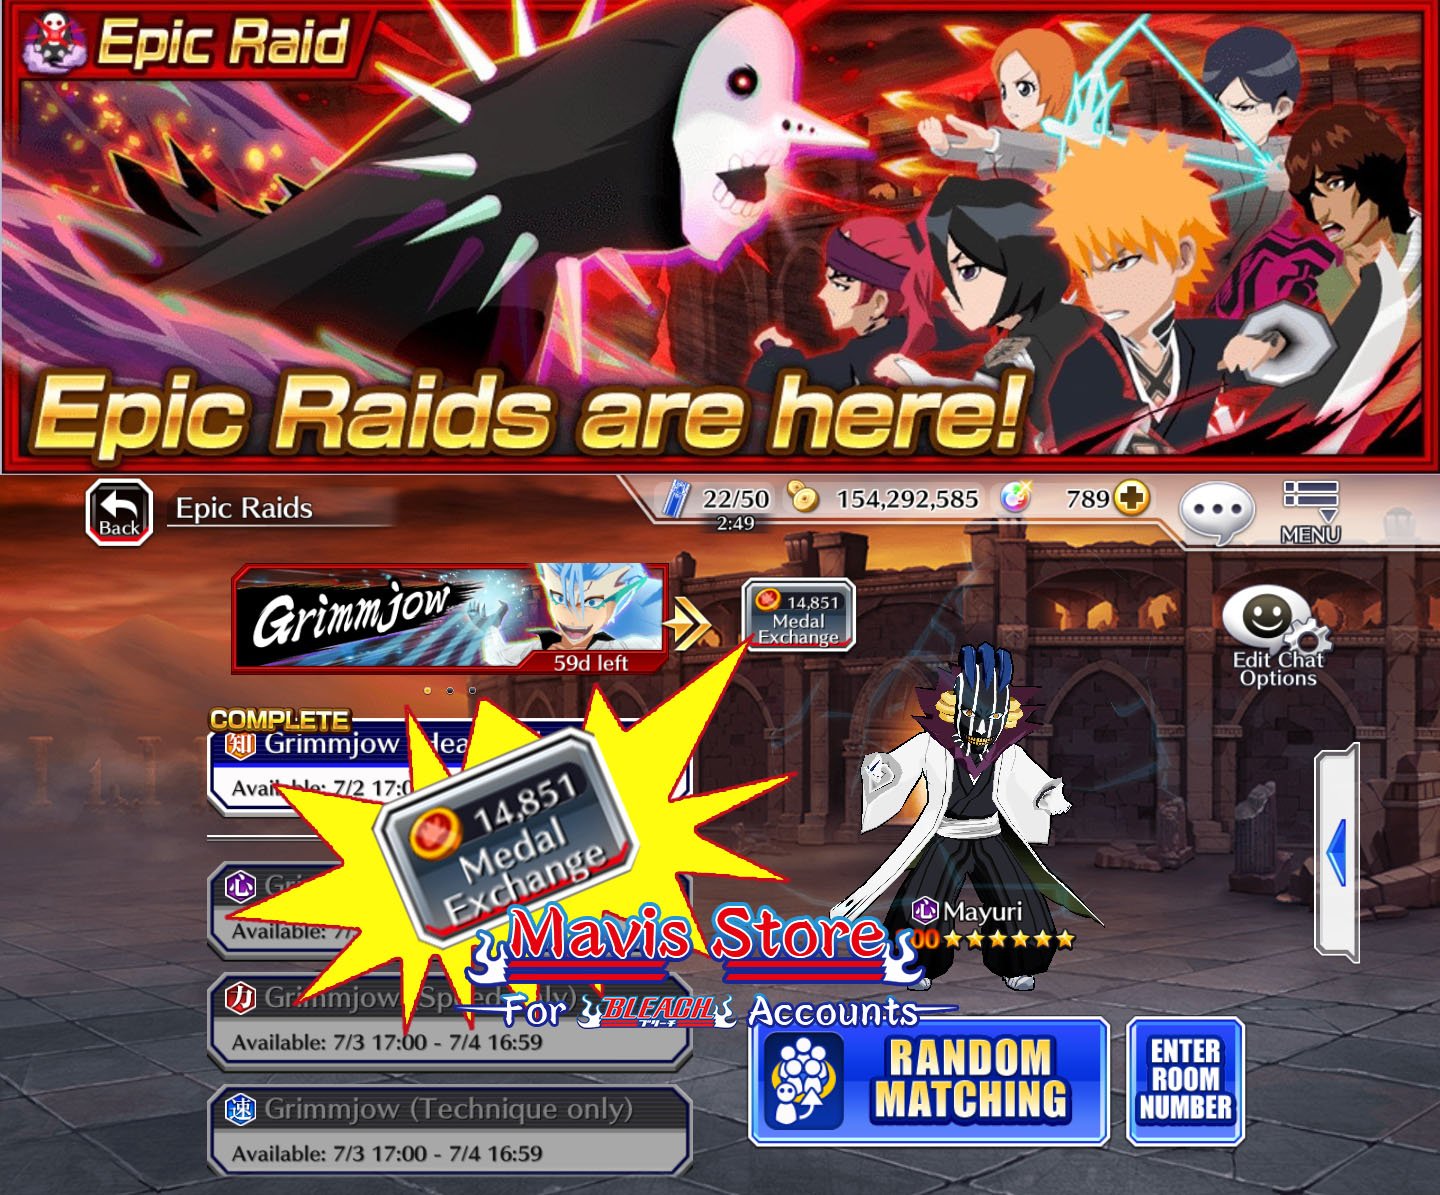 First Time Normal Senkaimon Cleared! : r/BleachBraveSouls